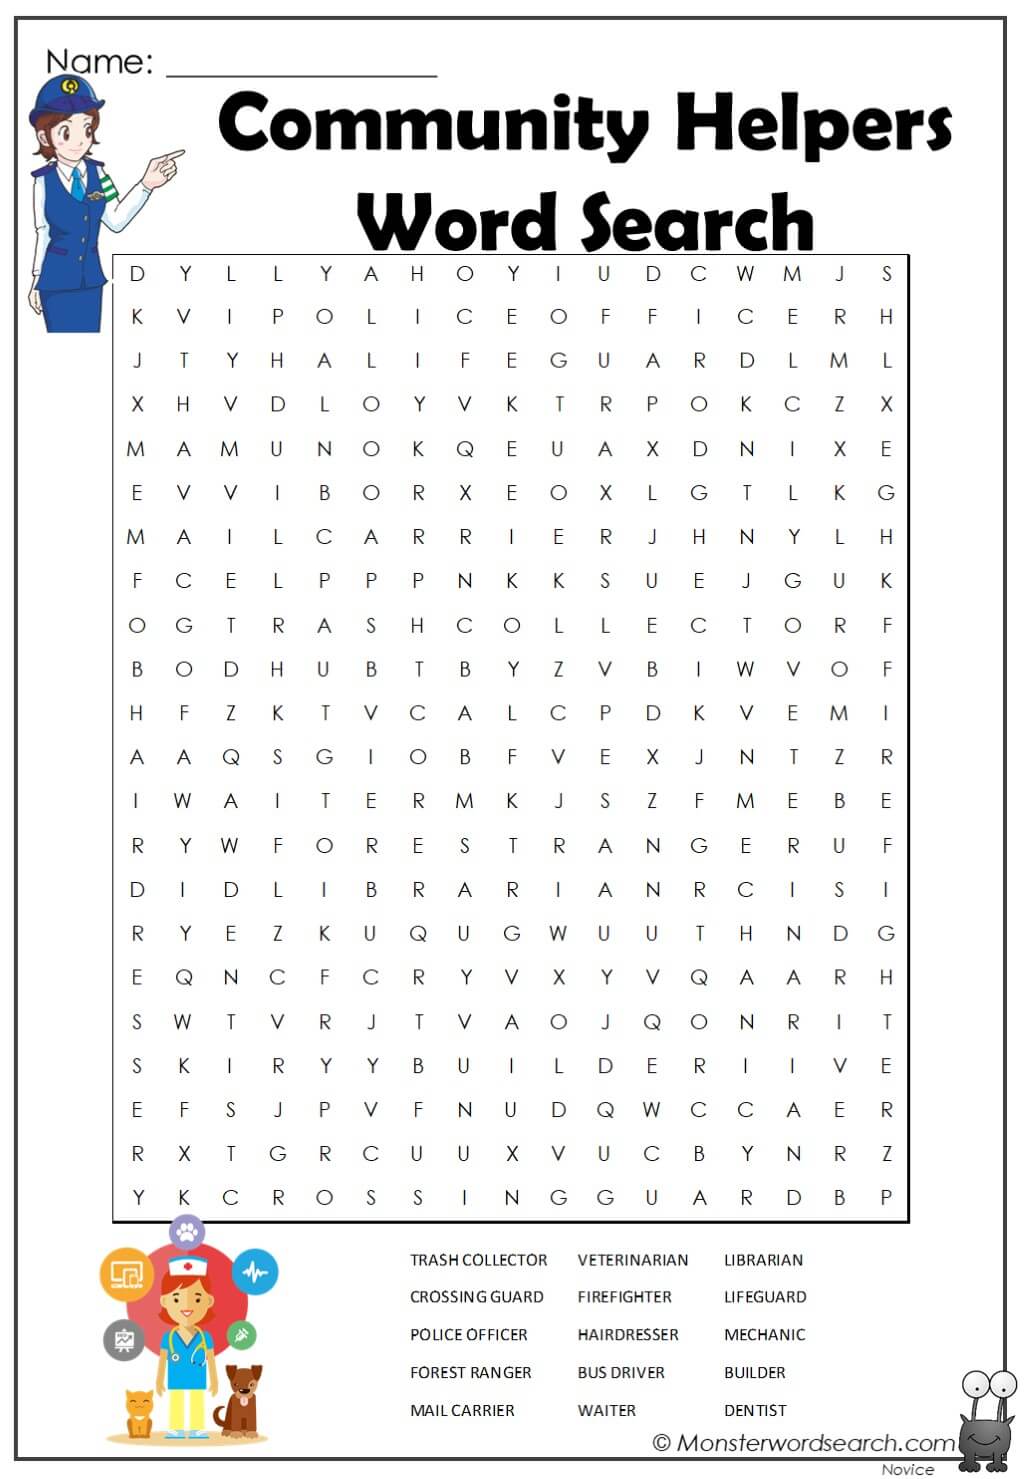 Community Helpers Word Search Monster Word Search